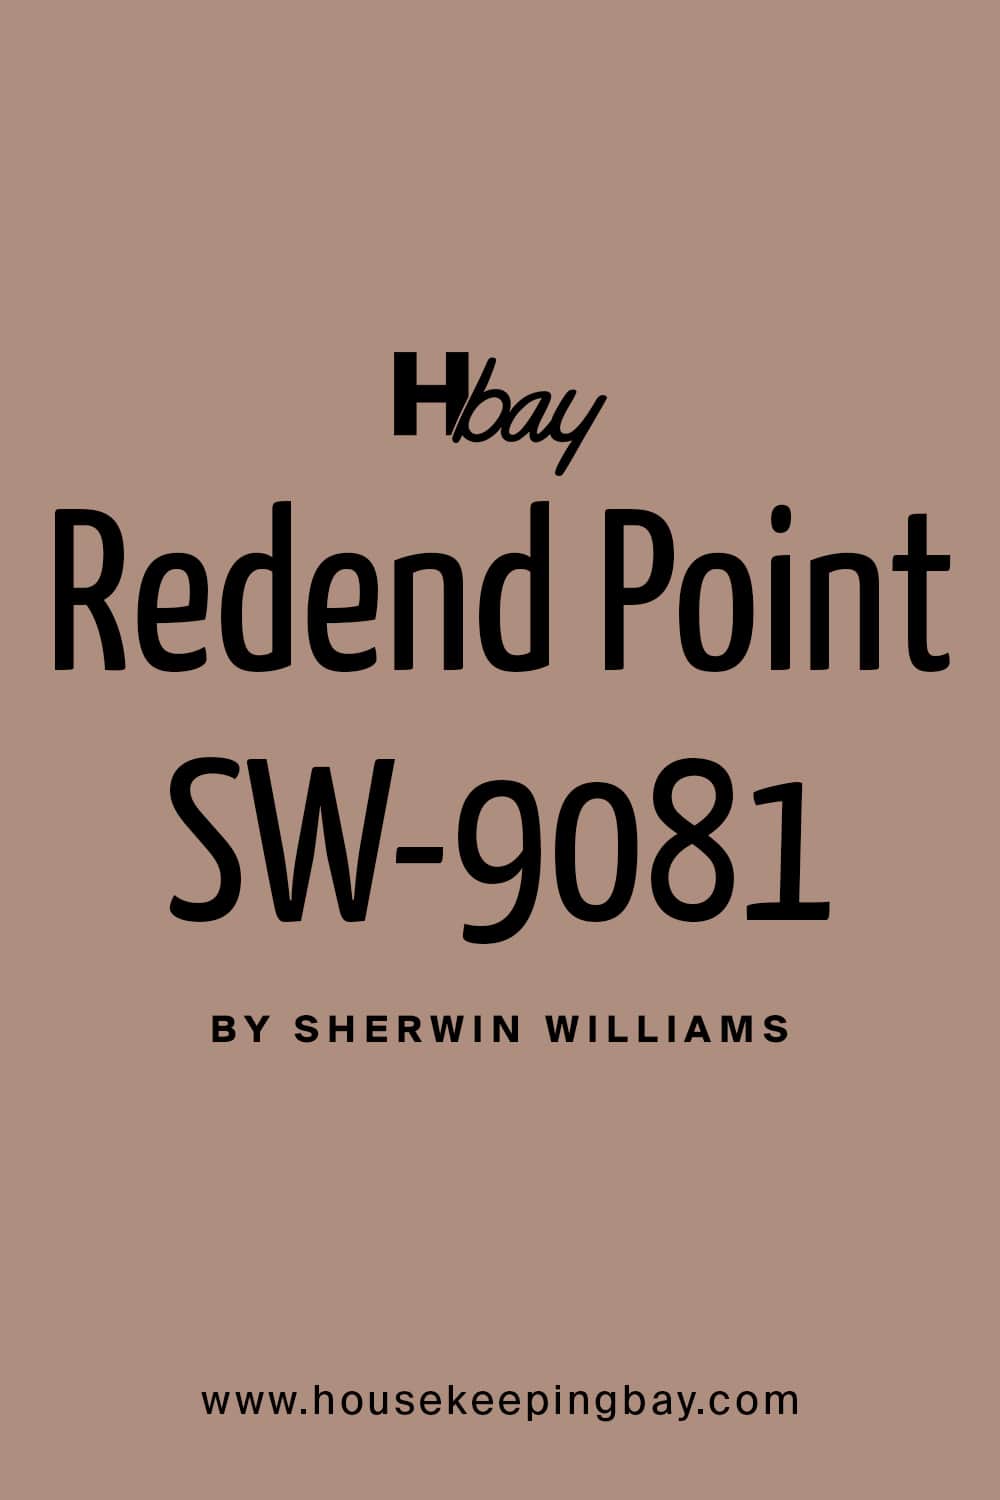 Redend Point SW 9081 by Sherwin Williams